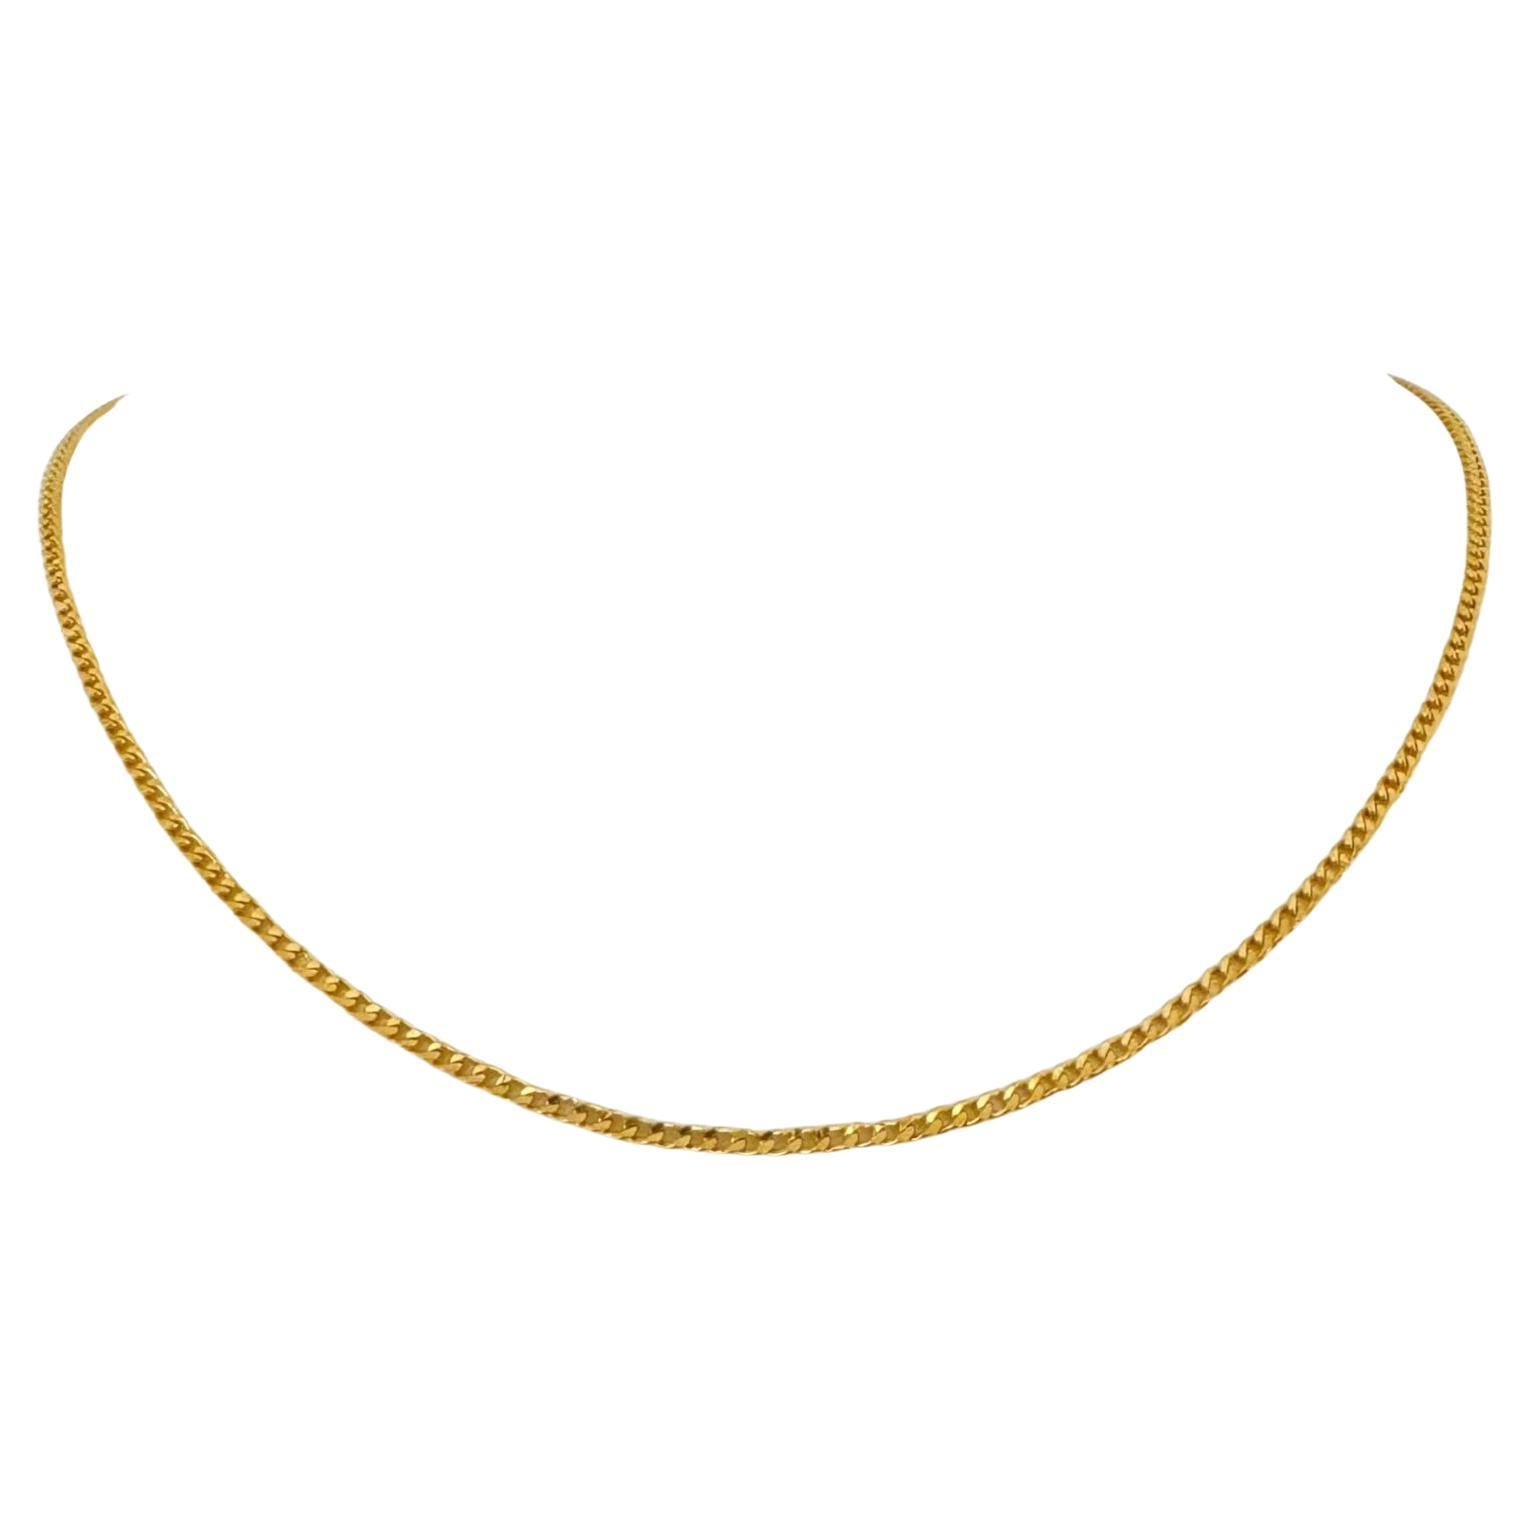 24 Karat Pure Yellow Gold Solid Thin Curb Link Chain Necklace 